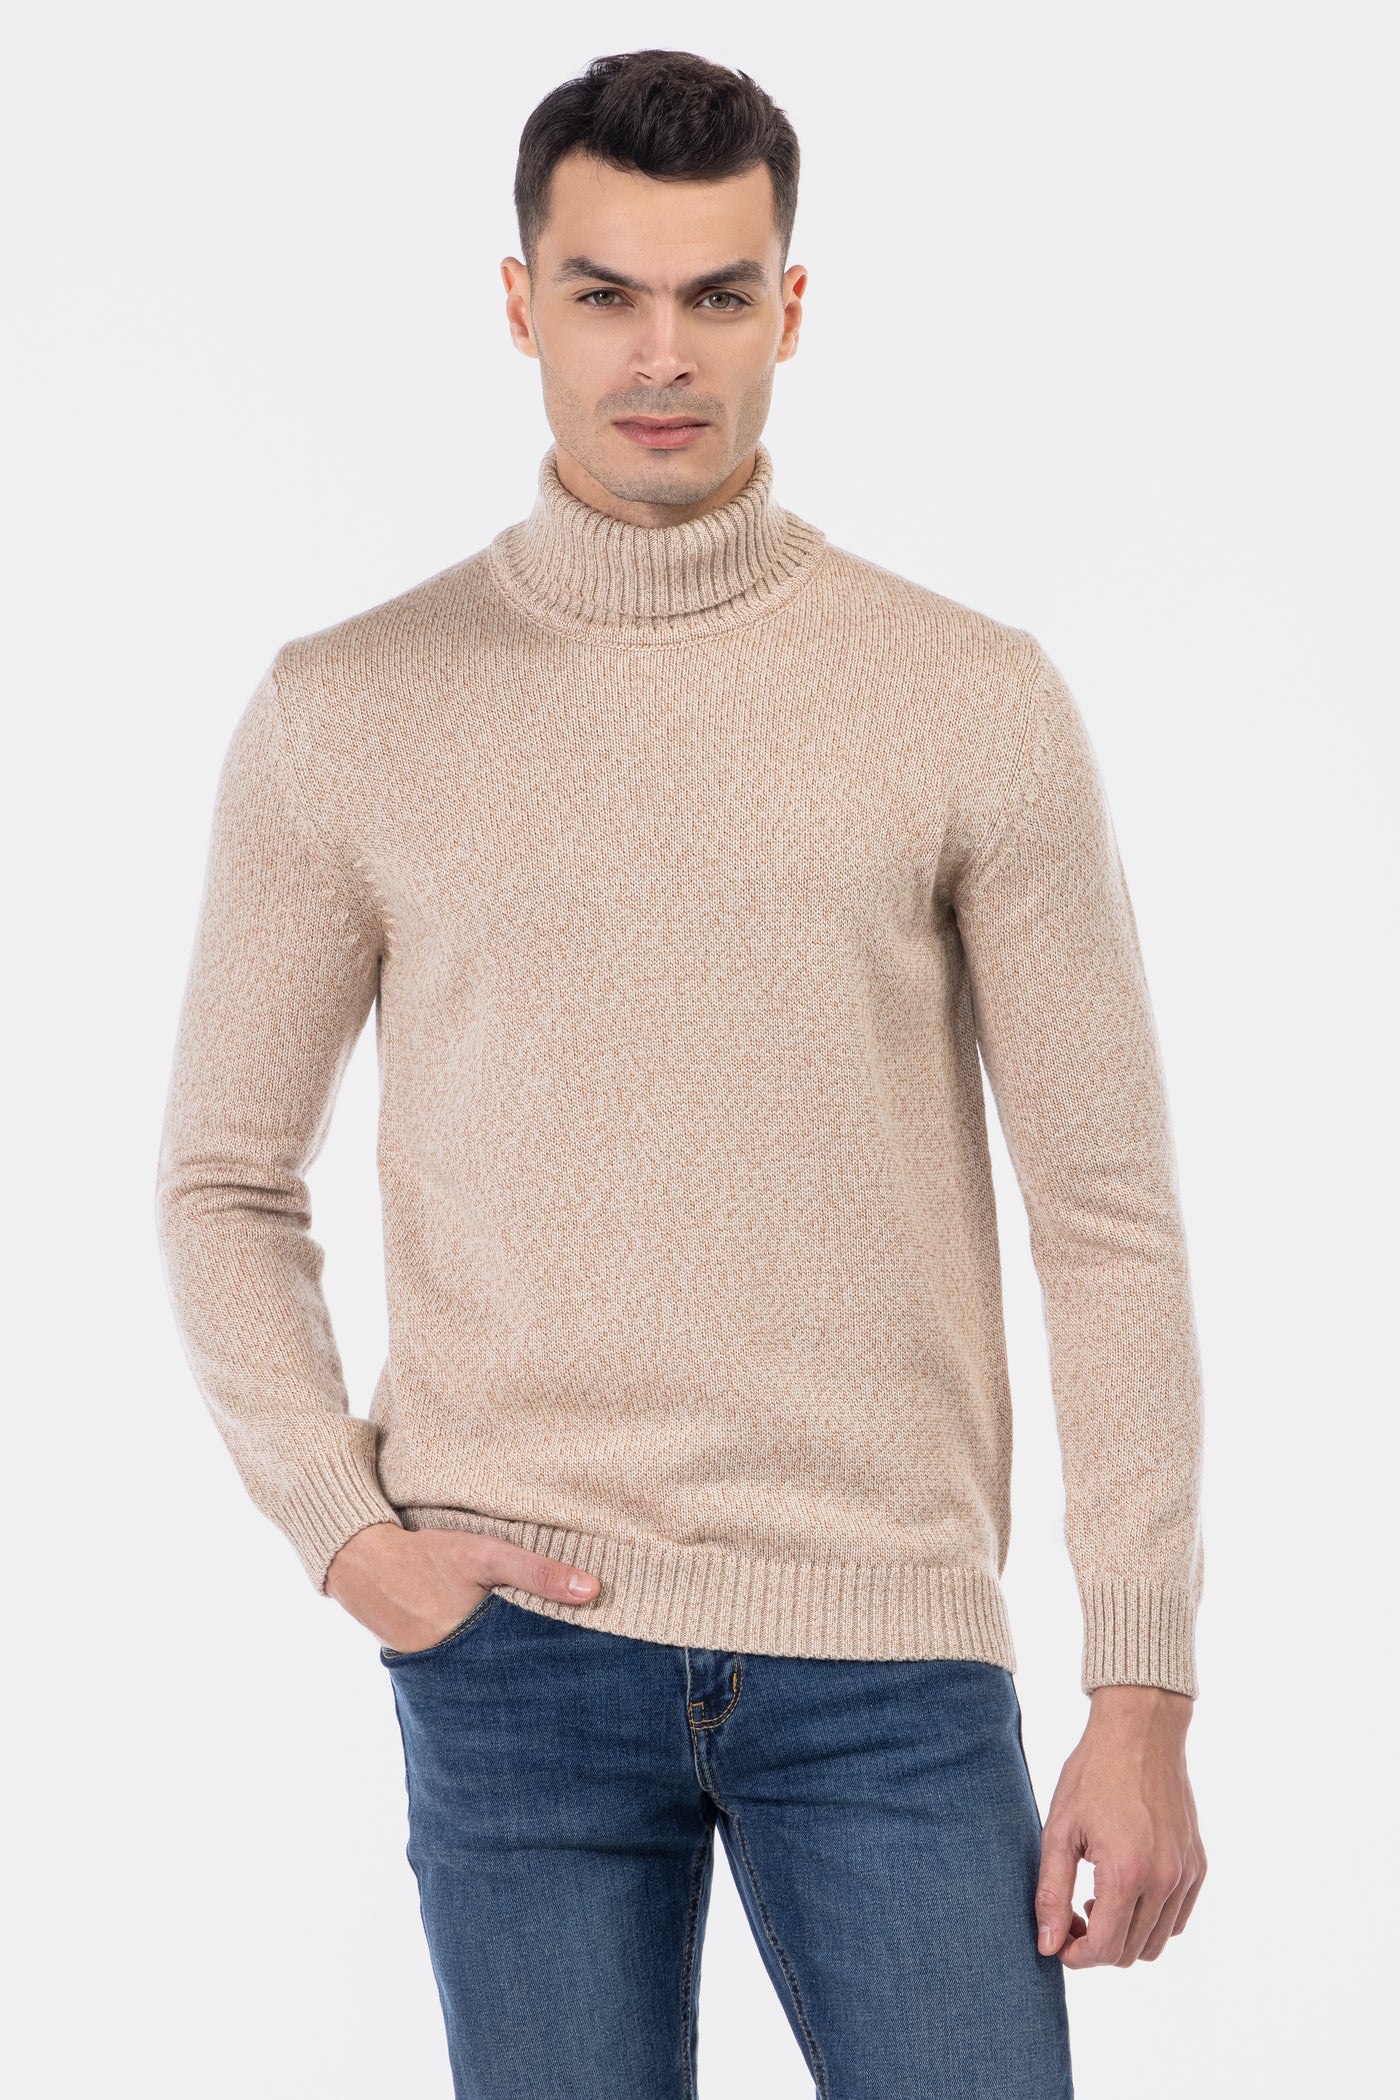 Jacquard Knitted Heavy Beige High-neck  Pullover